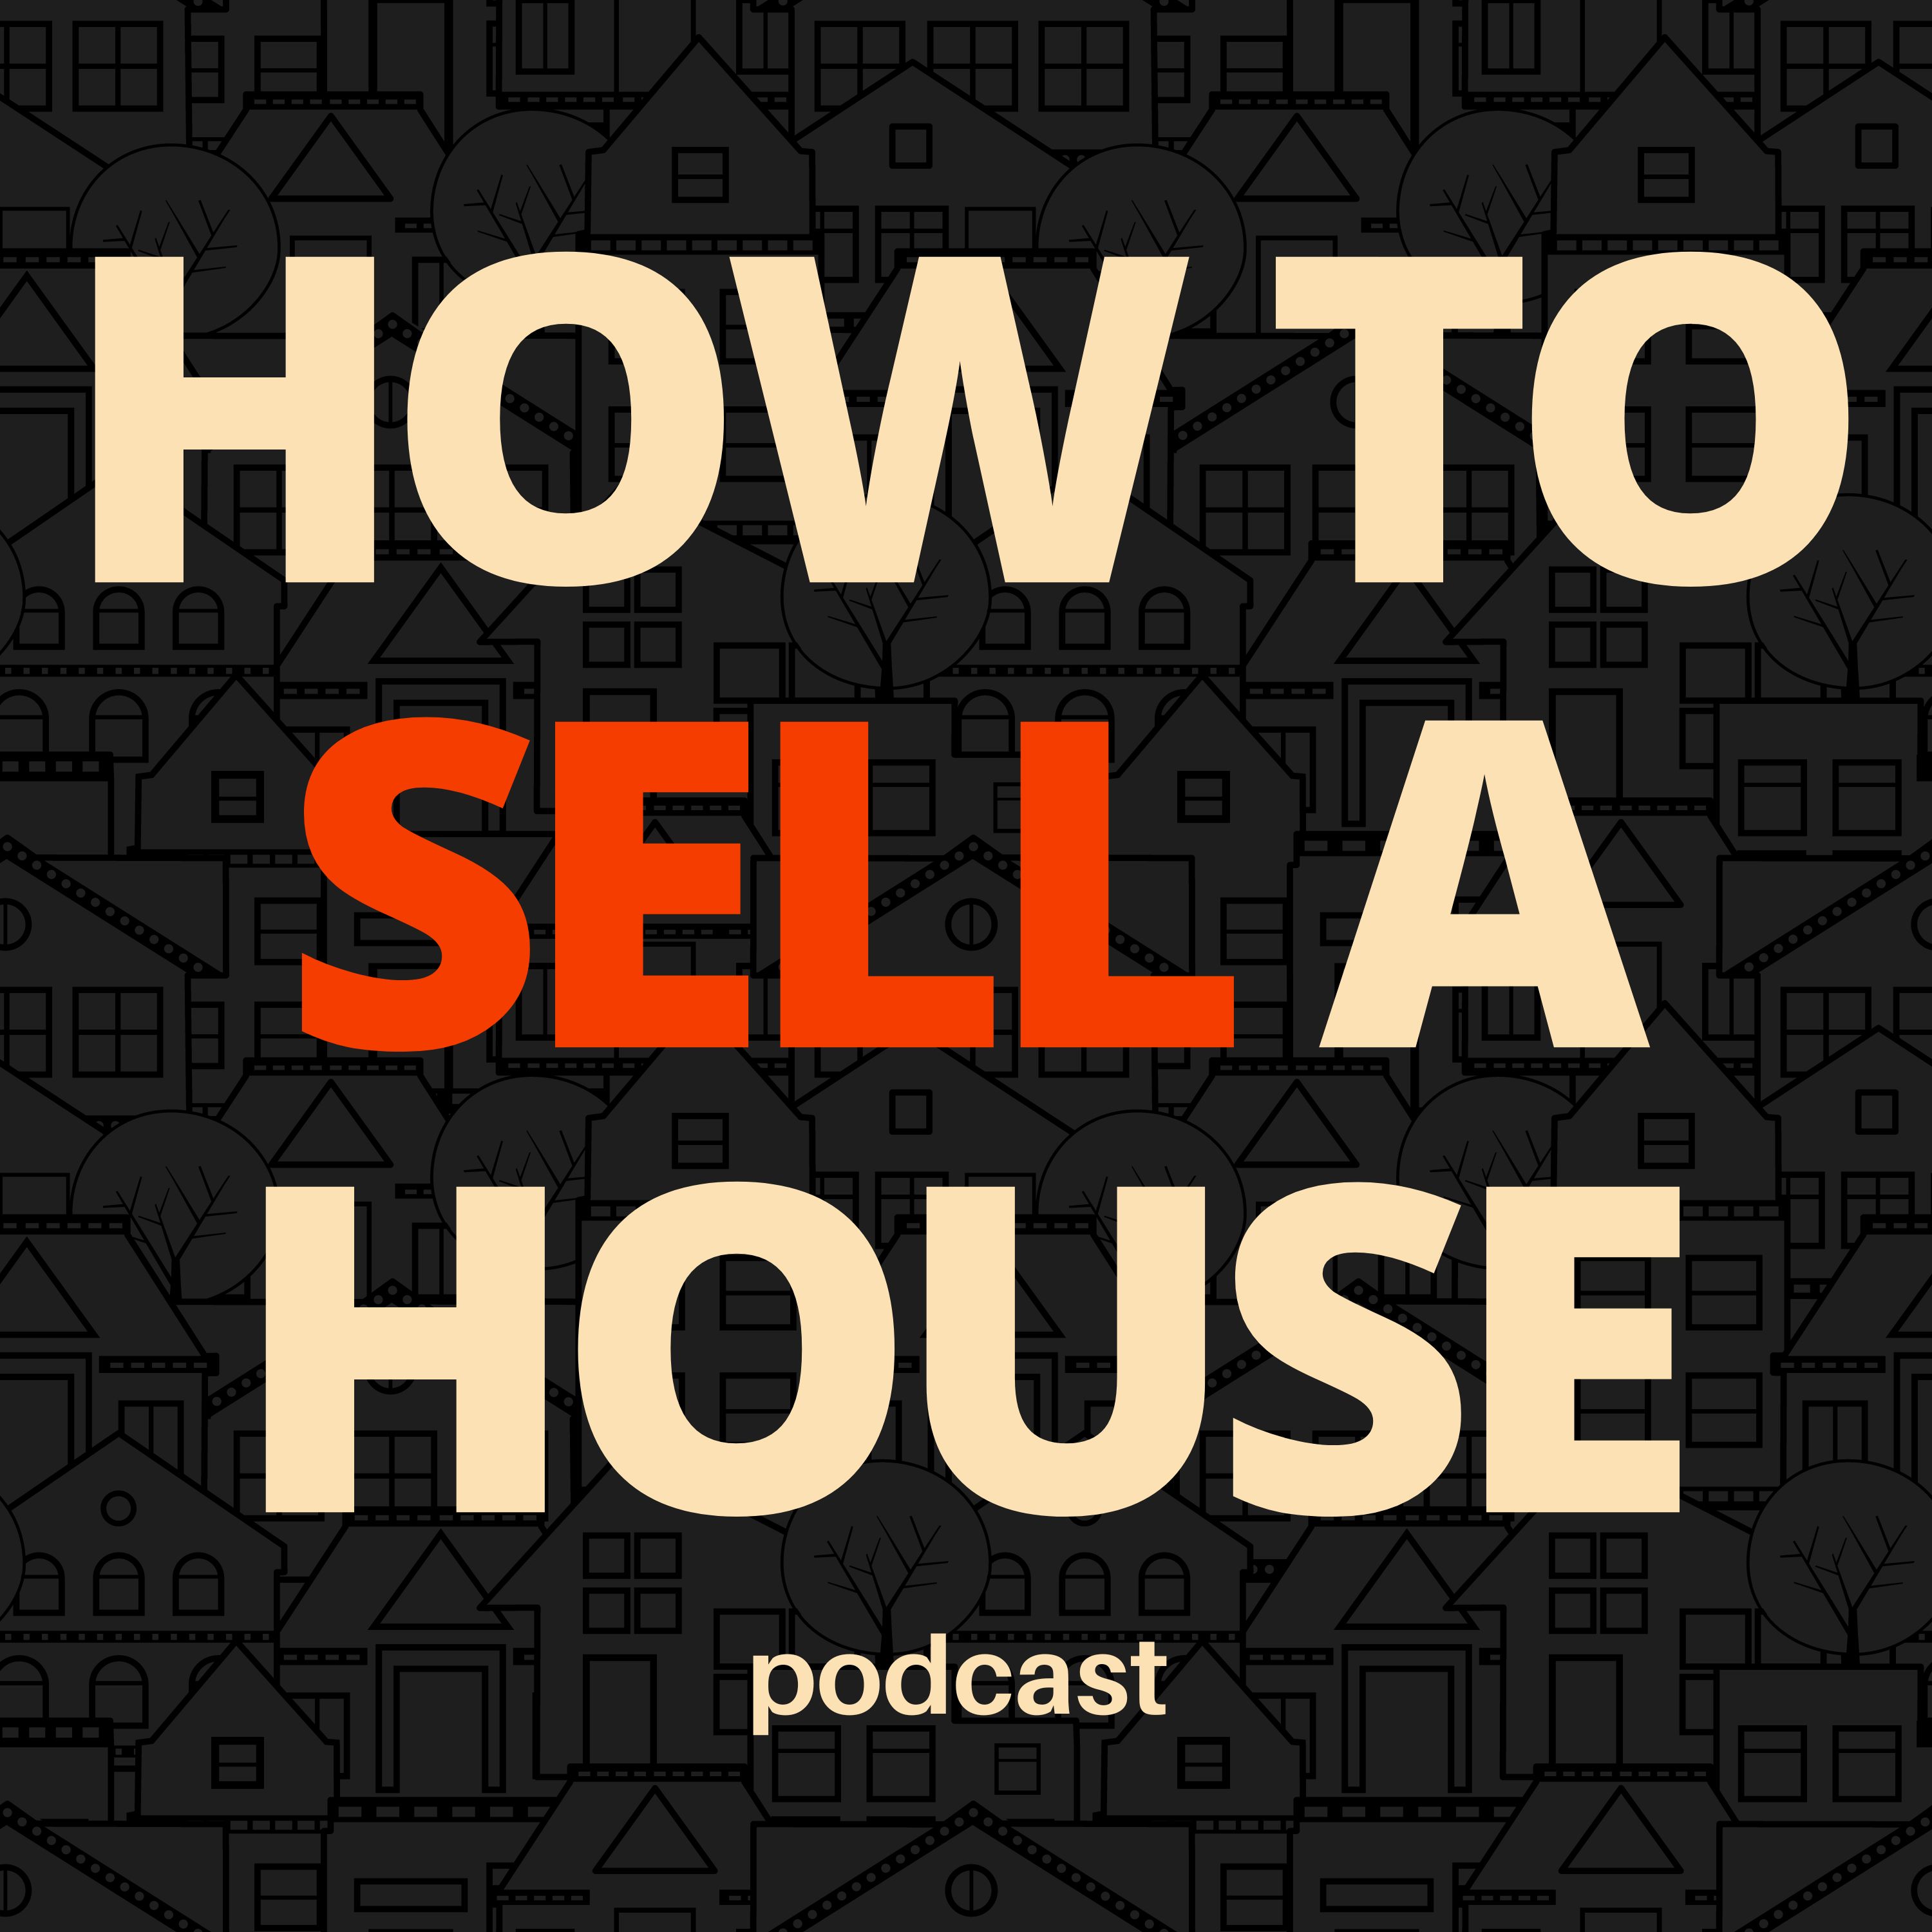 How to Sell A House Podcast screenshot